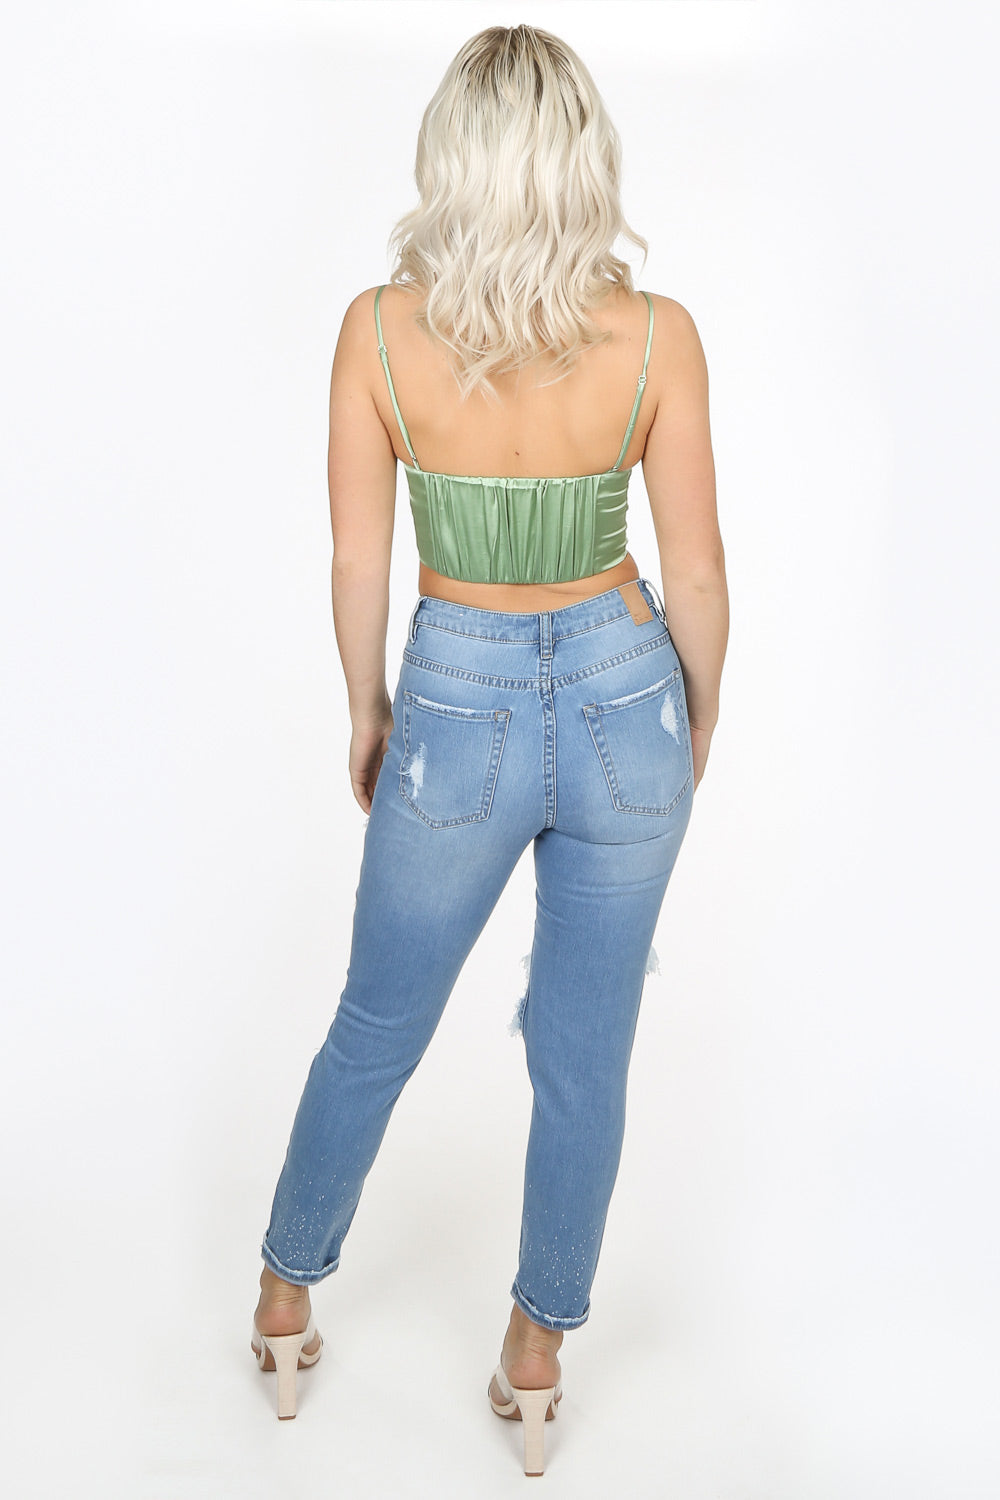 Green Ruched Front Satin Bralette